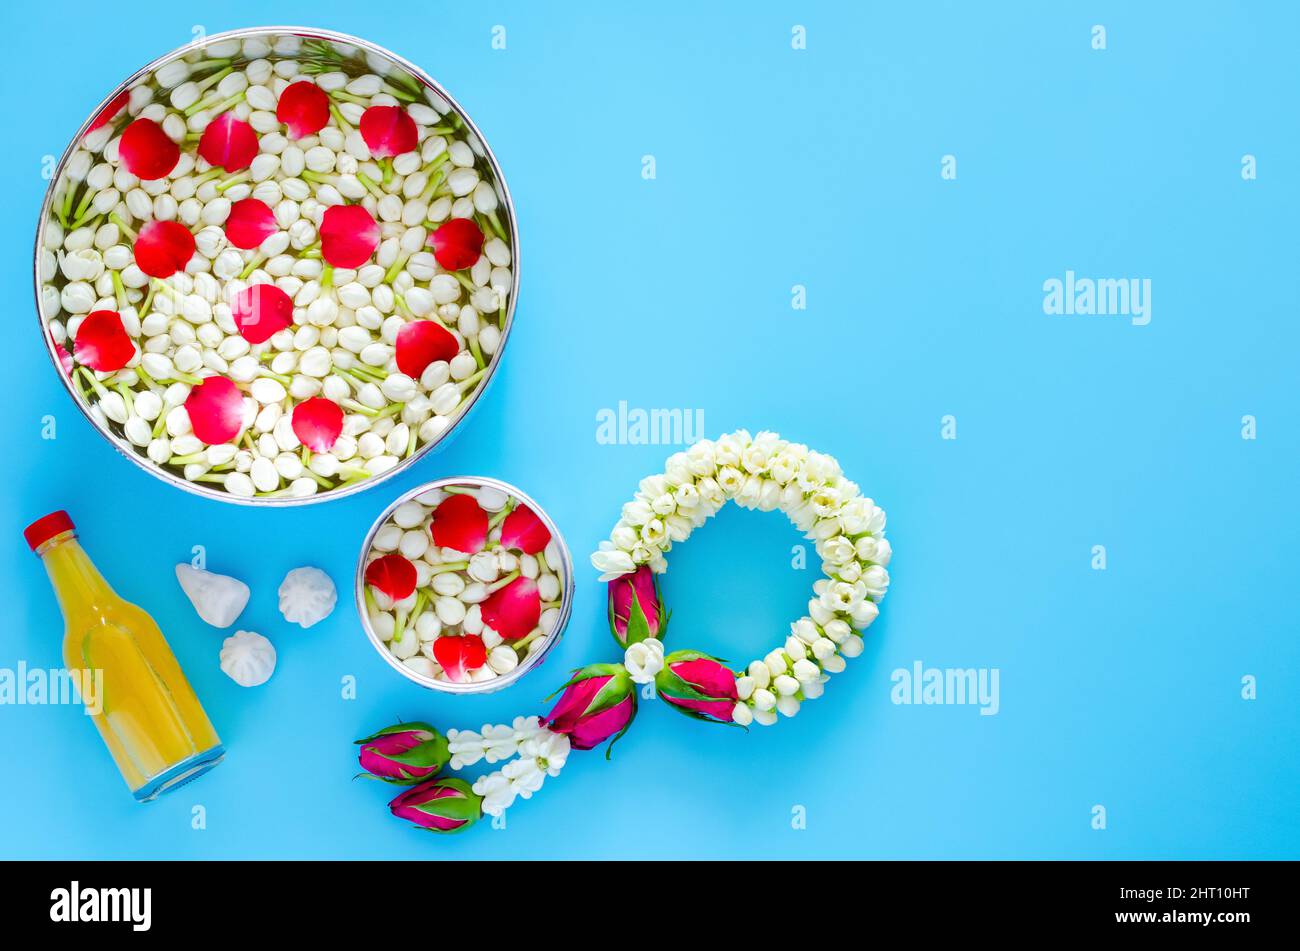 Songkran festival background with flowers in water bowls, jasmine garland, scented water and marly limestone for blessing on blue background. Stock Photo